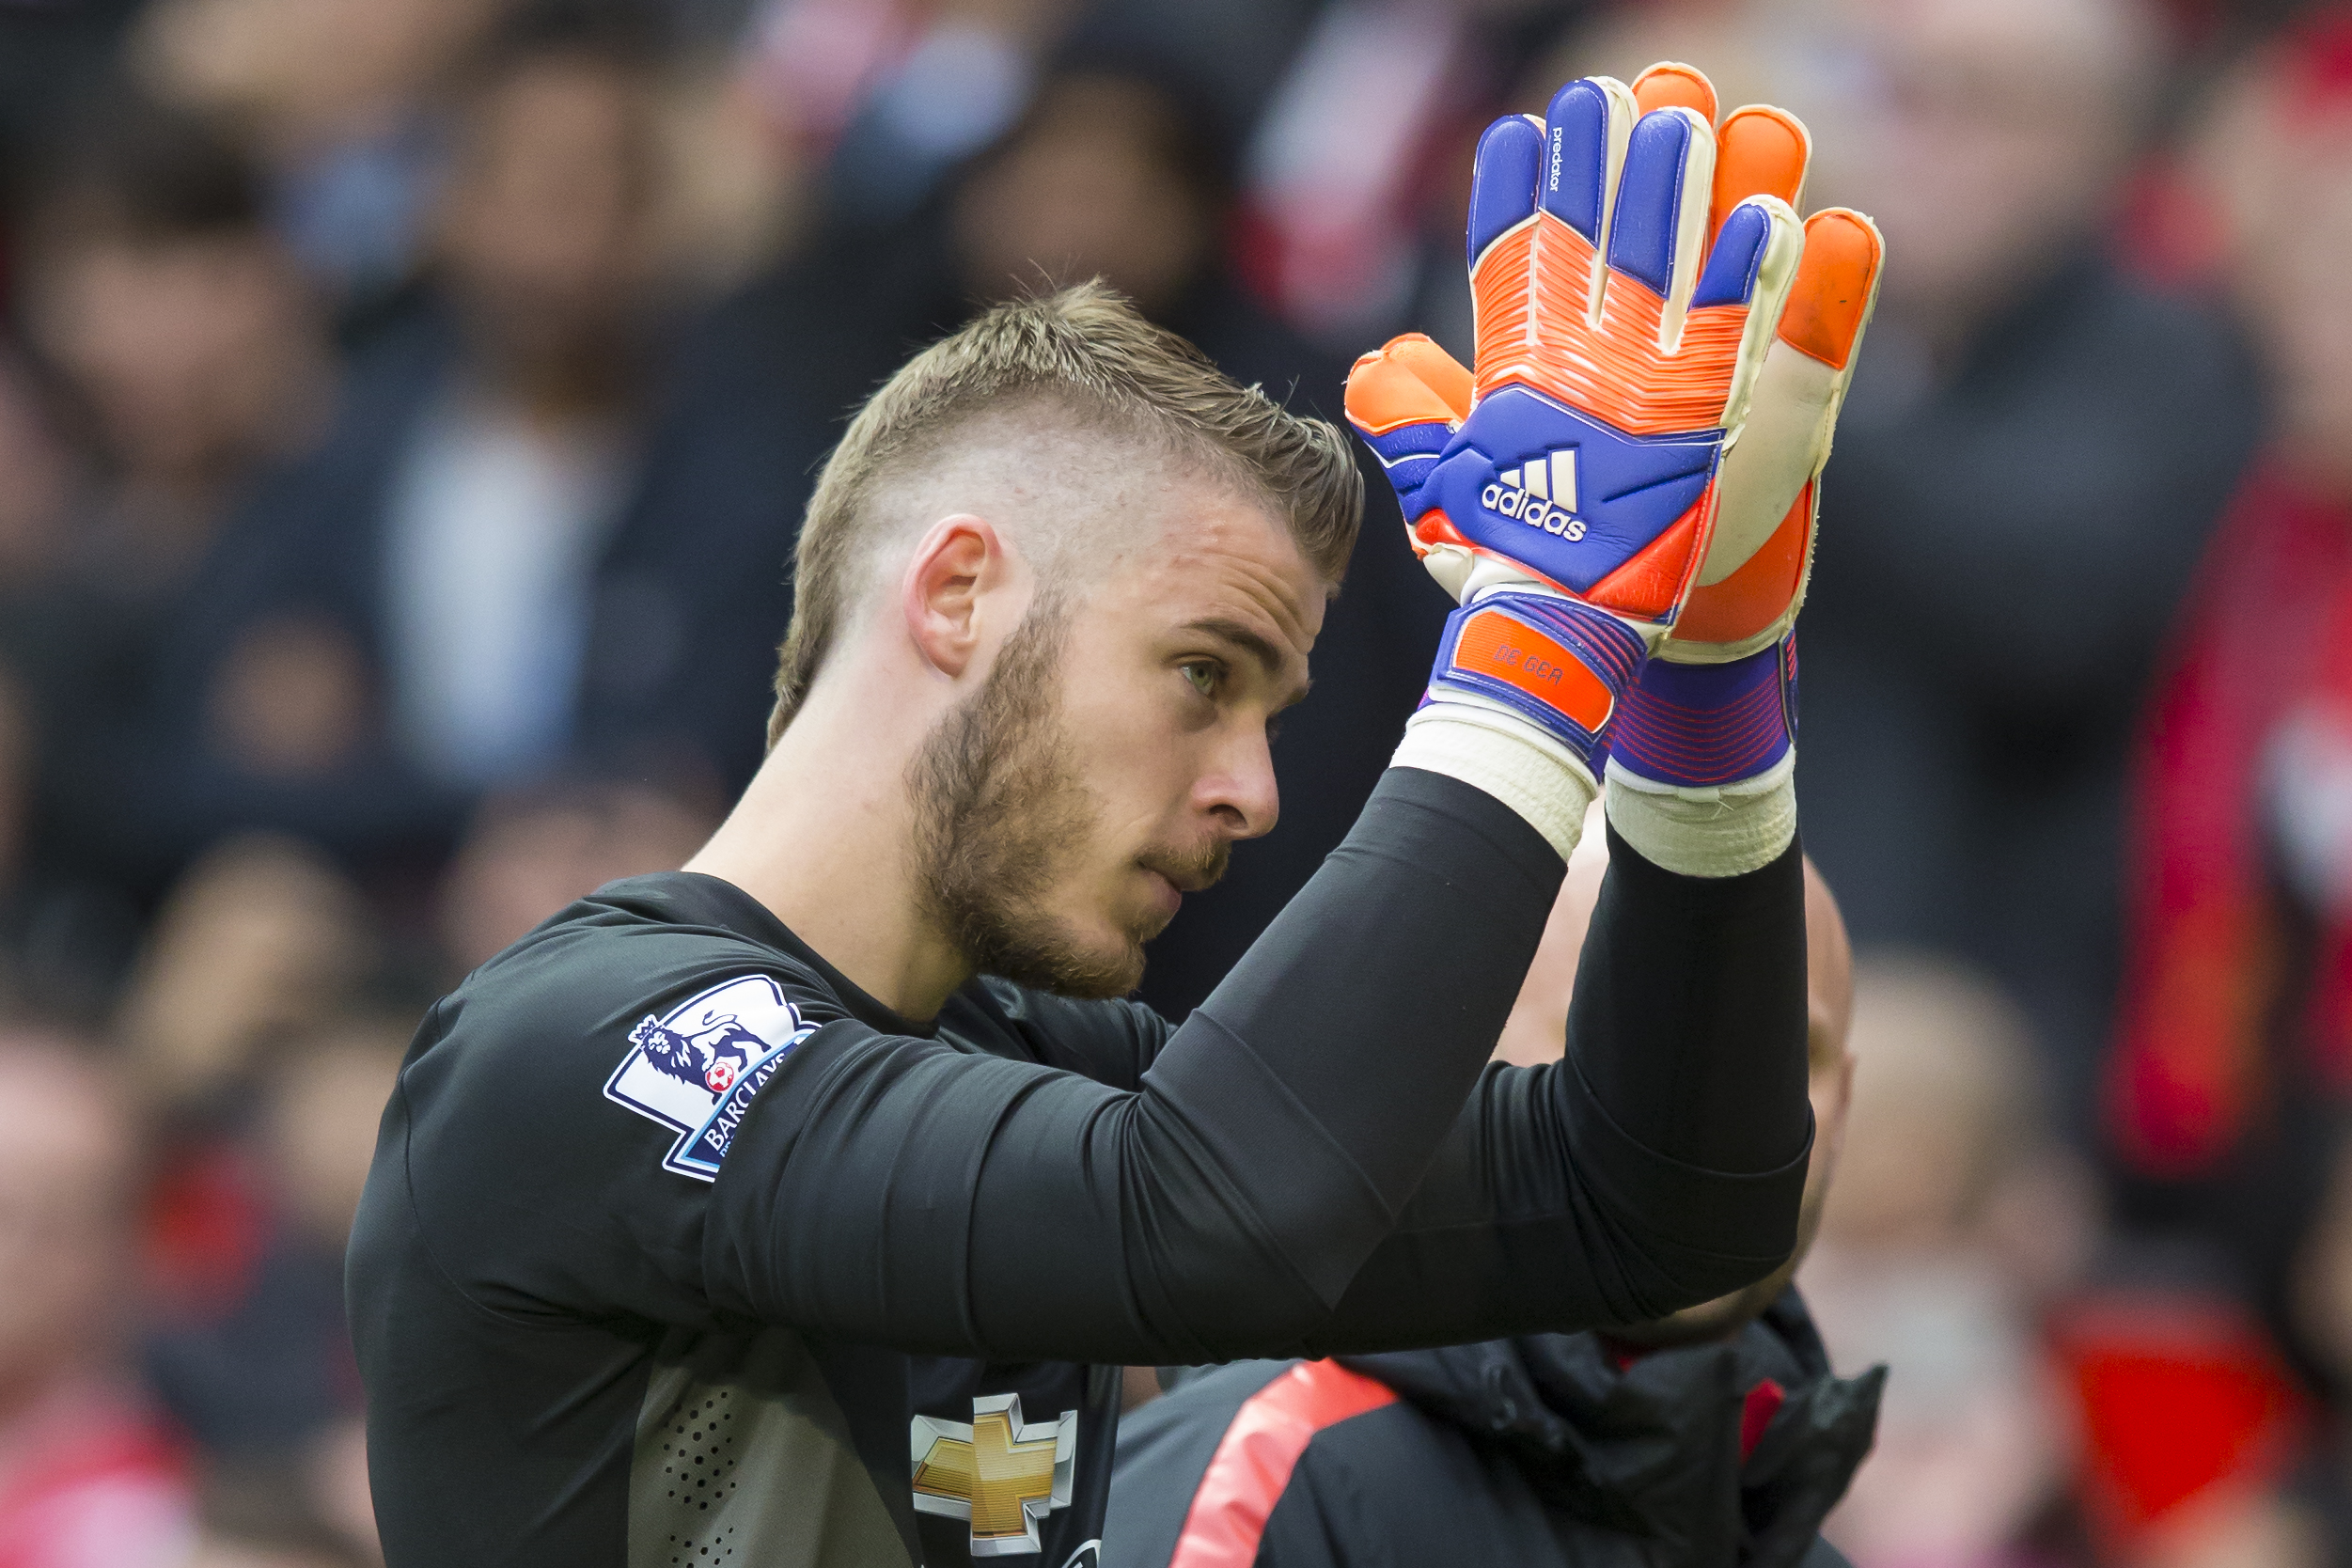 David de Gea applauds fans in what might have been his last Old Trafford appearance. Photo: AP